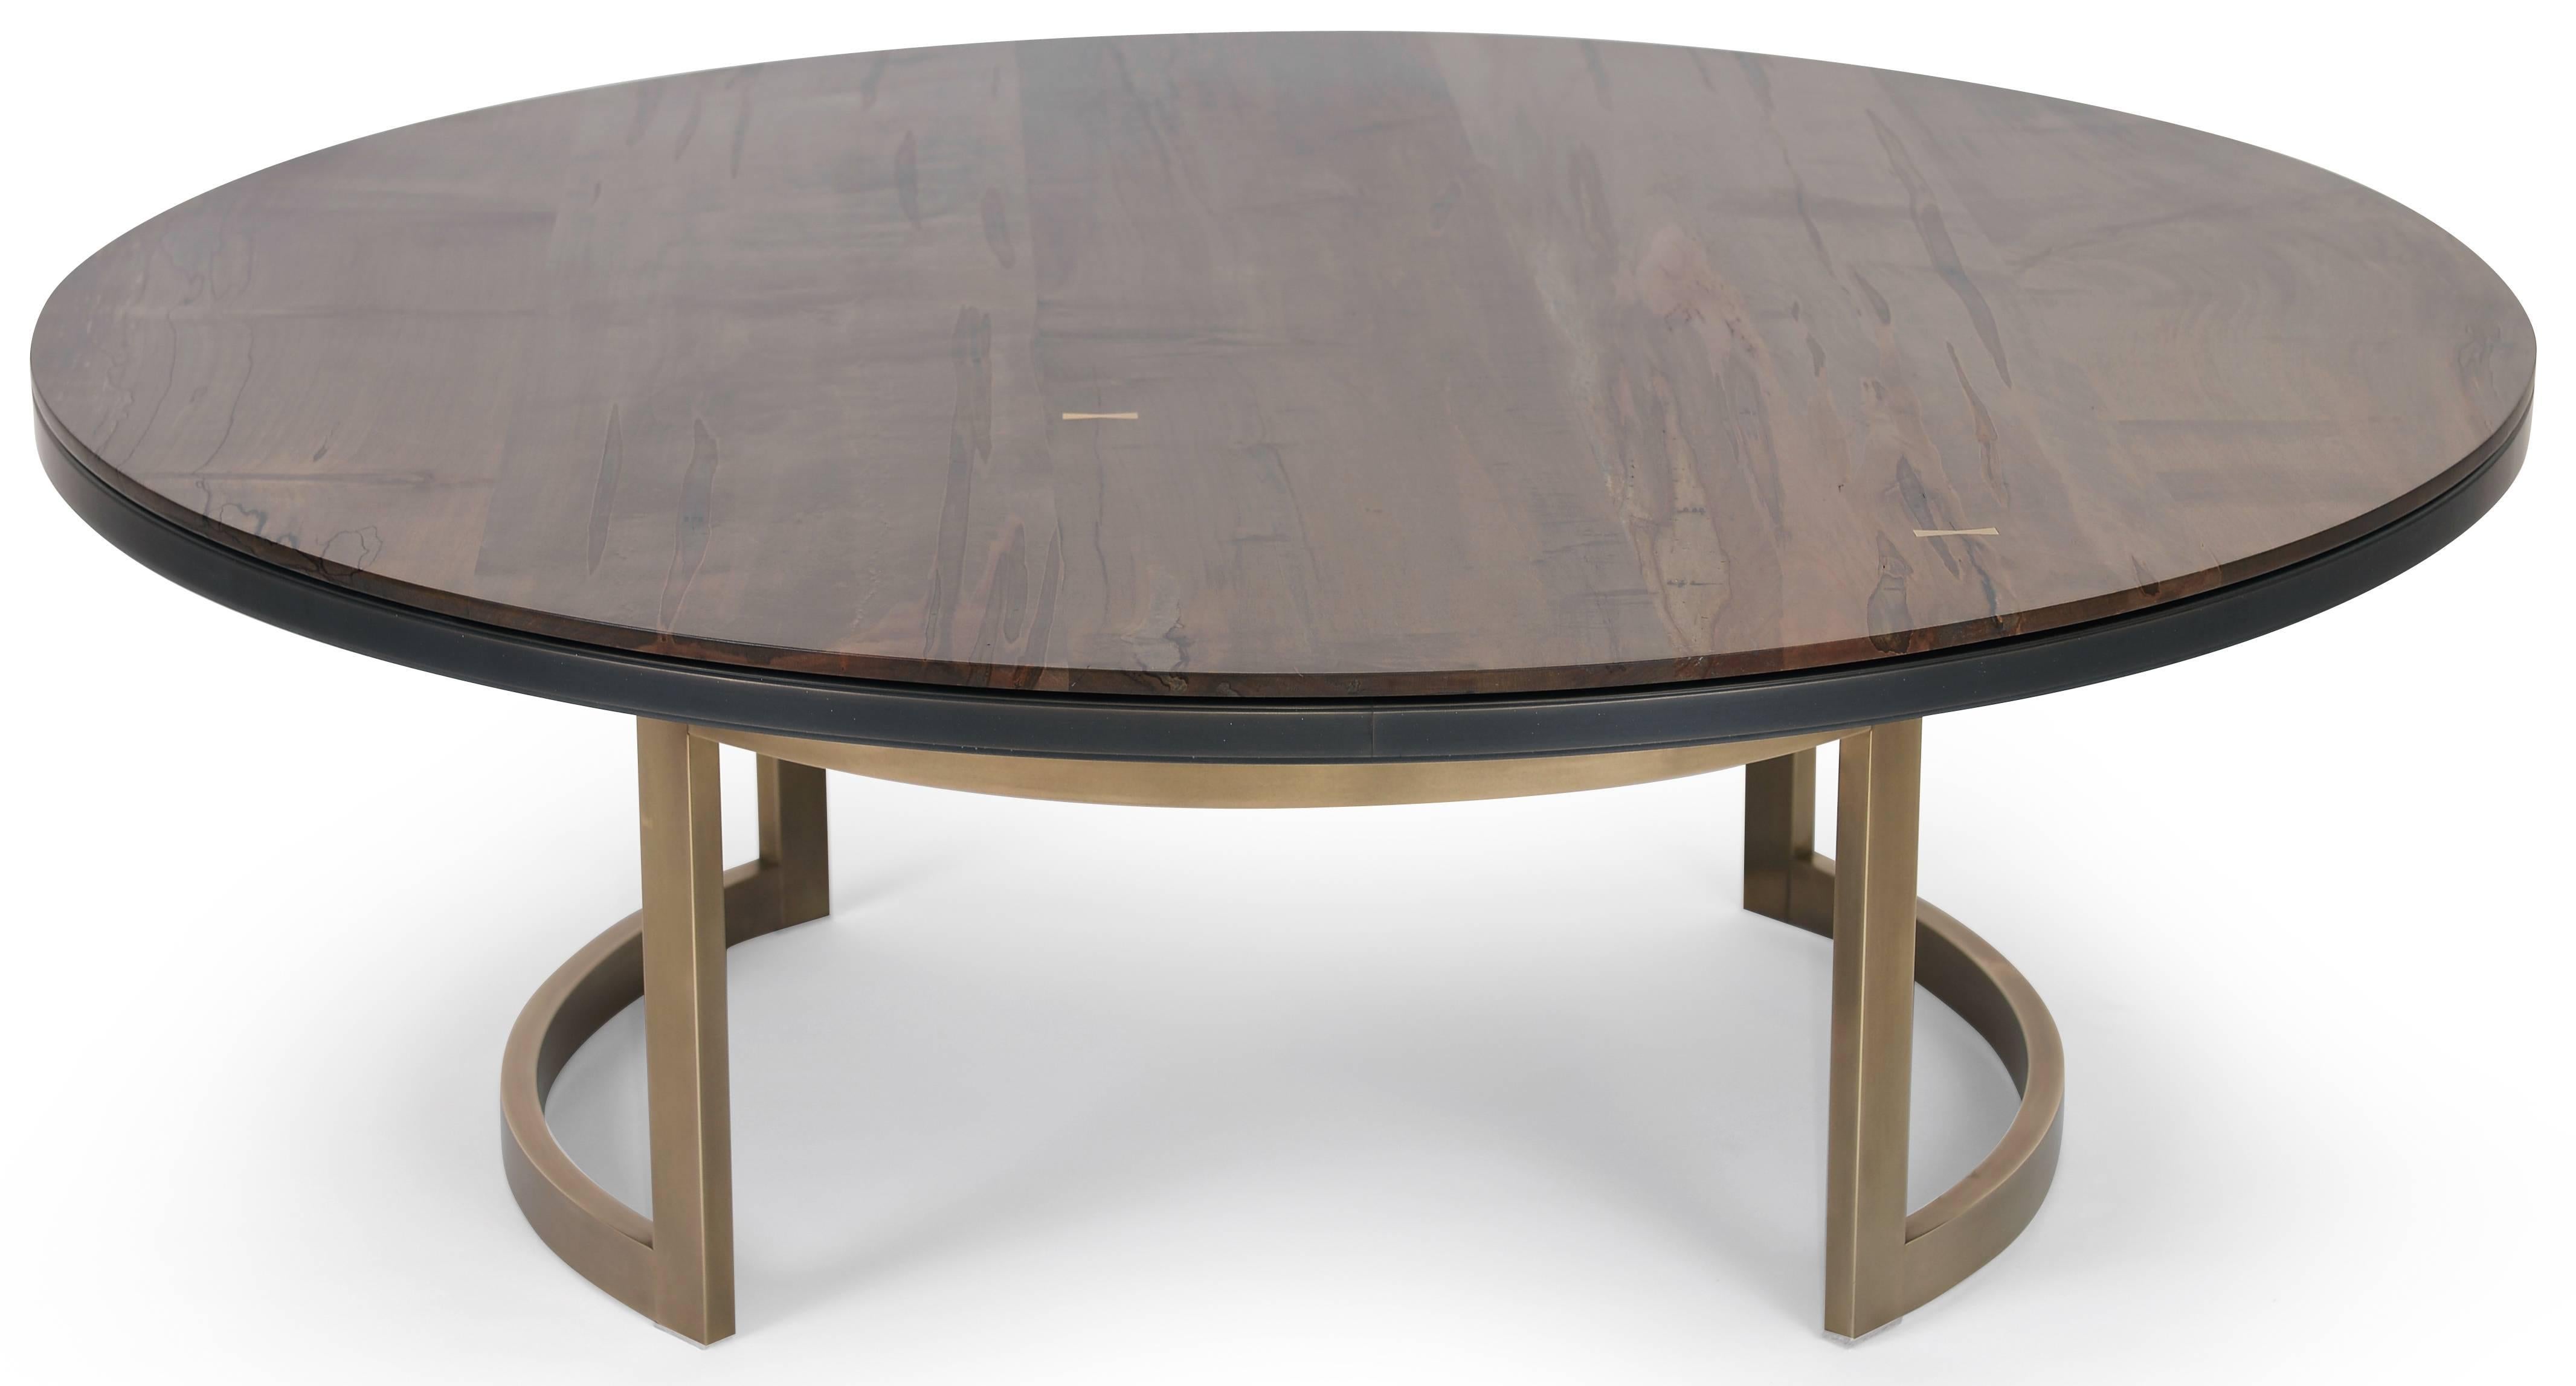 The luxurious Gotham coffee table features a two-tiered tabletop and an elegantly curved architectural bronze base. The top layer is handcrafted oxidized ambrosia maple bookmatched planks with bronze butterflies, and the bottom is blackened bronze